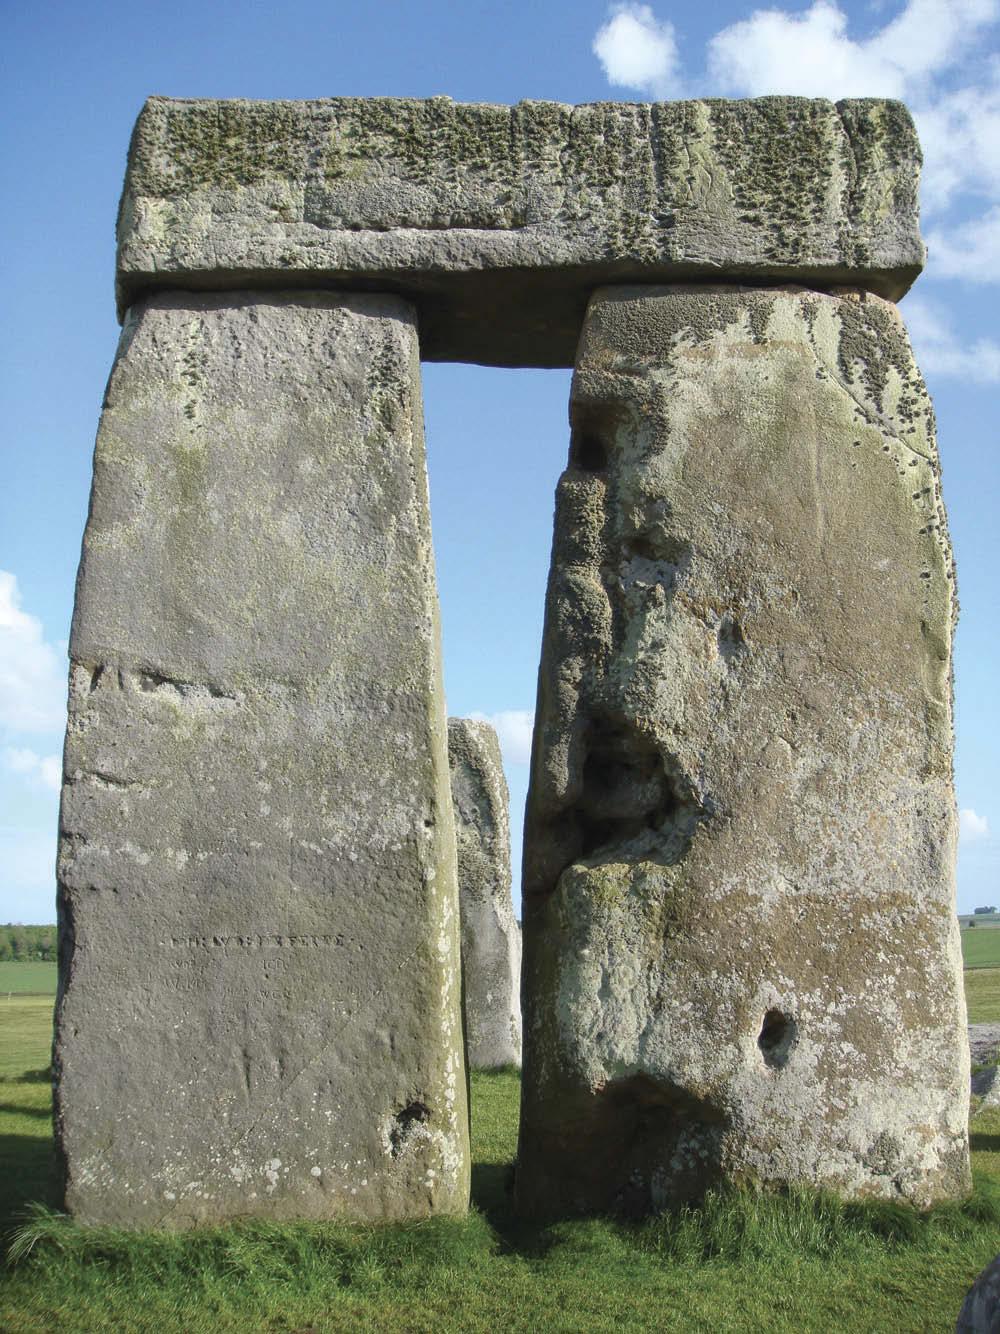 TIME & MIND 93 Rock and Roll During its early life, through most of the early third millennium BC, Stonehenge was far from exceptional; only with the construction of the first stone structures in the